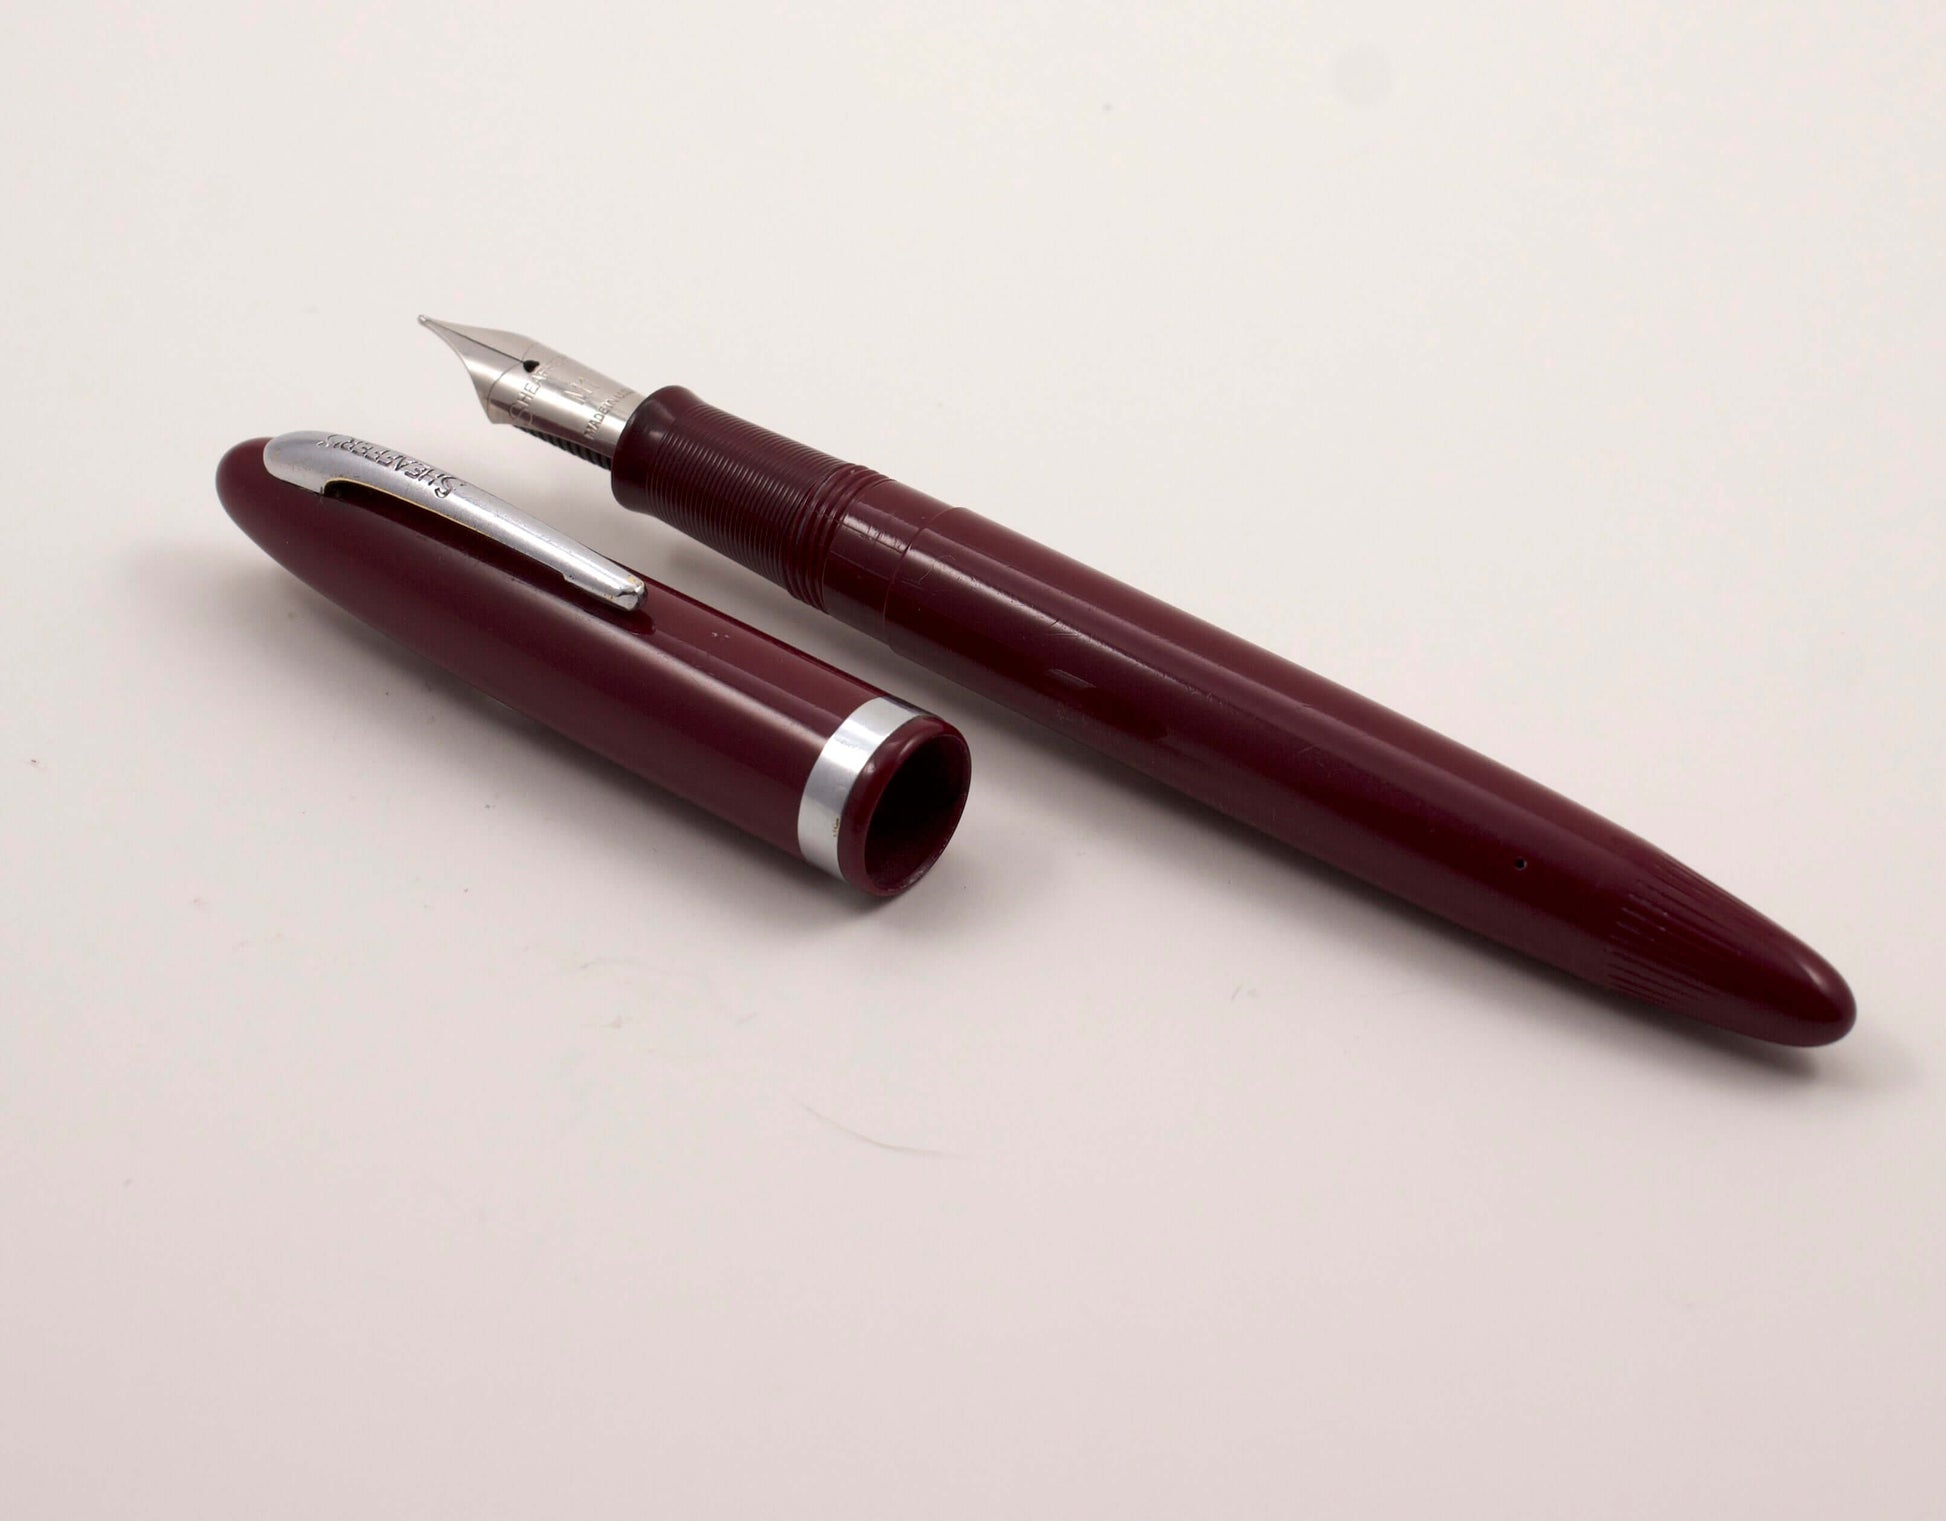 Sheaffer Tip-Dip Touchdown, Burgundy, 1950's Stainless Nib, M1 Medium Type: Sheaffer Tip Dip Fountain Pen Manufacture Year: 1950's Length: 5 1/8 Filling System: Touchdown; Restored with new sac and O-ring Color/Pattern: Burgundy Nib Type/Condition and rem